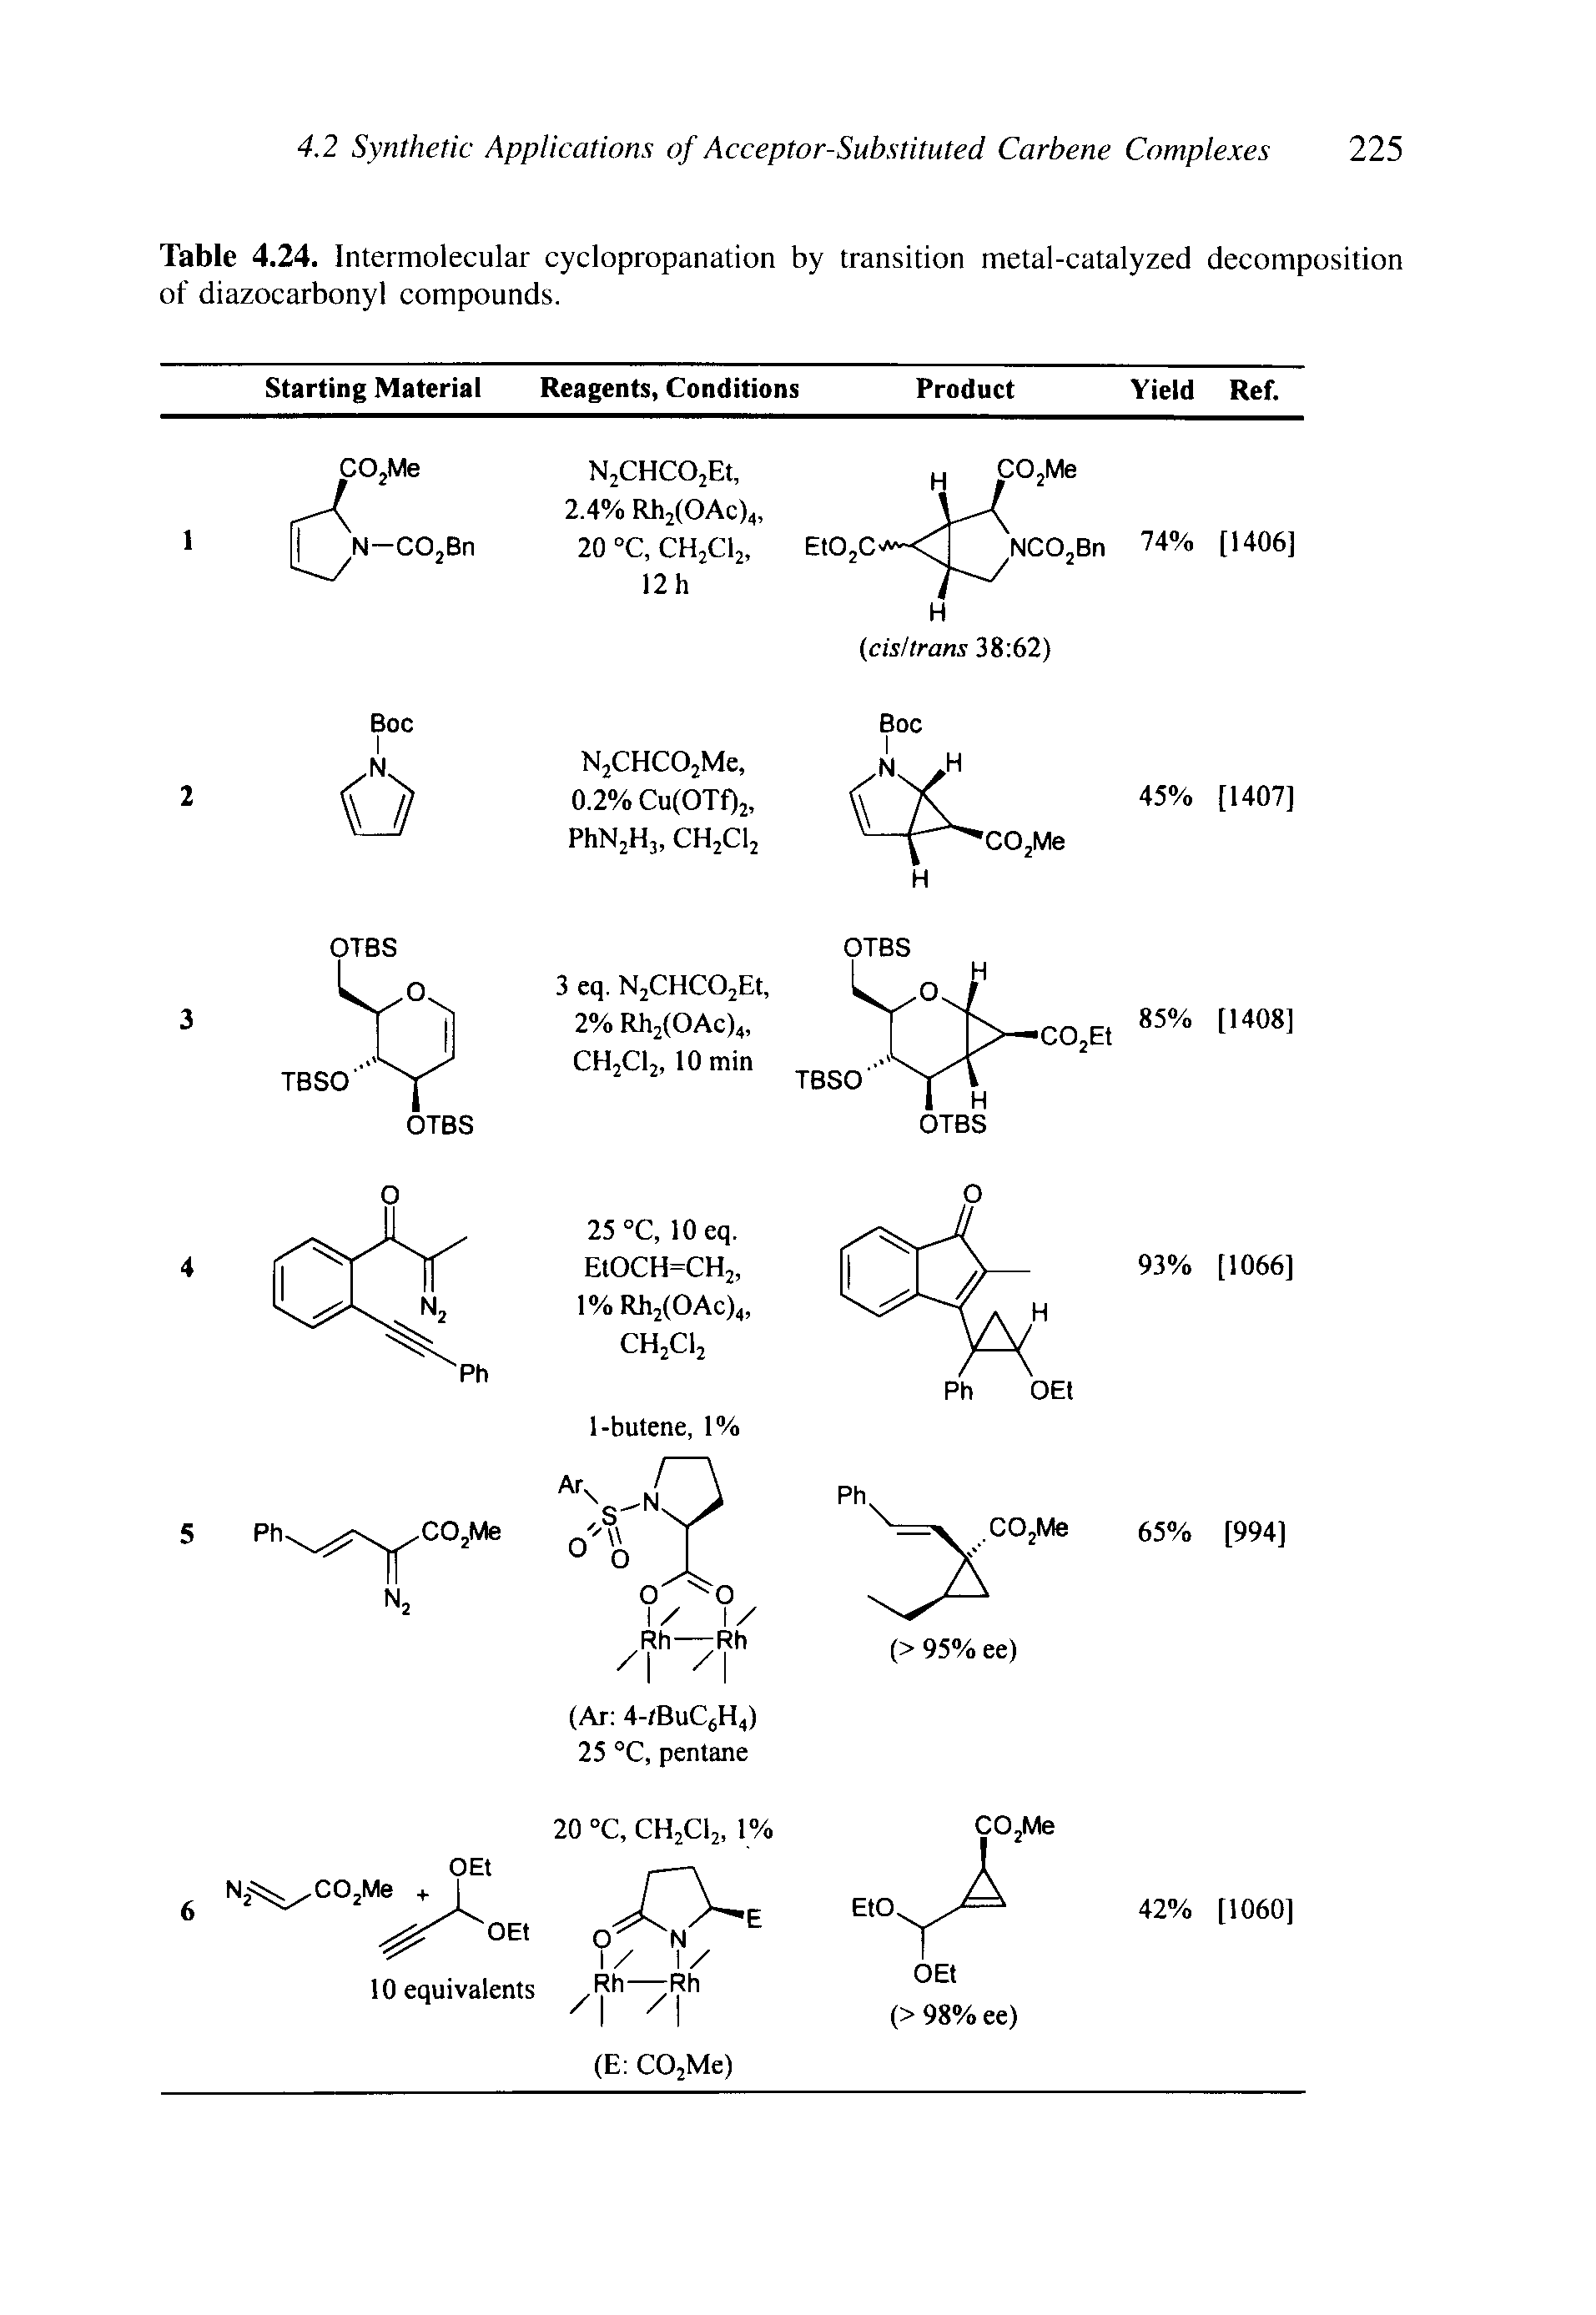 Table 4.24. Intermolecular cyclopropanation by transition metal-catalyzed decomposition of diazocarbonyl compounds.